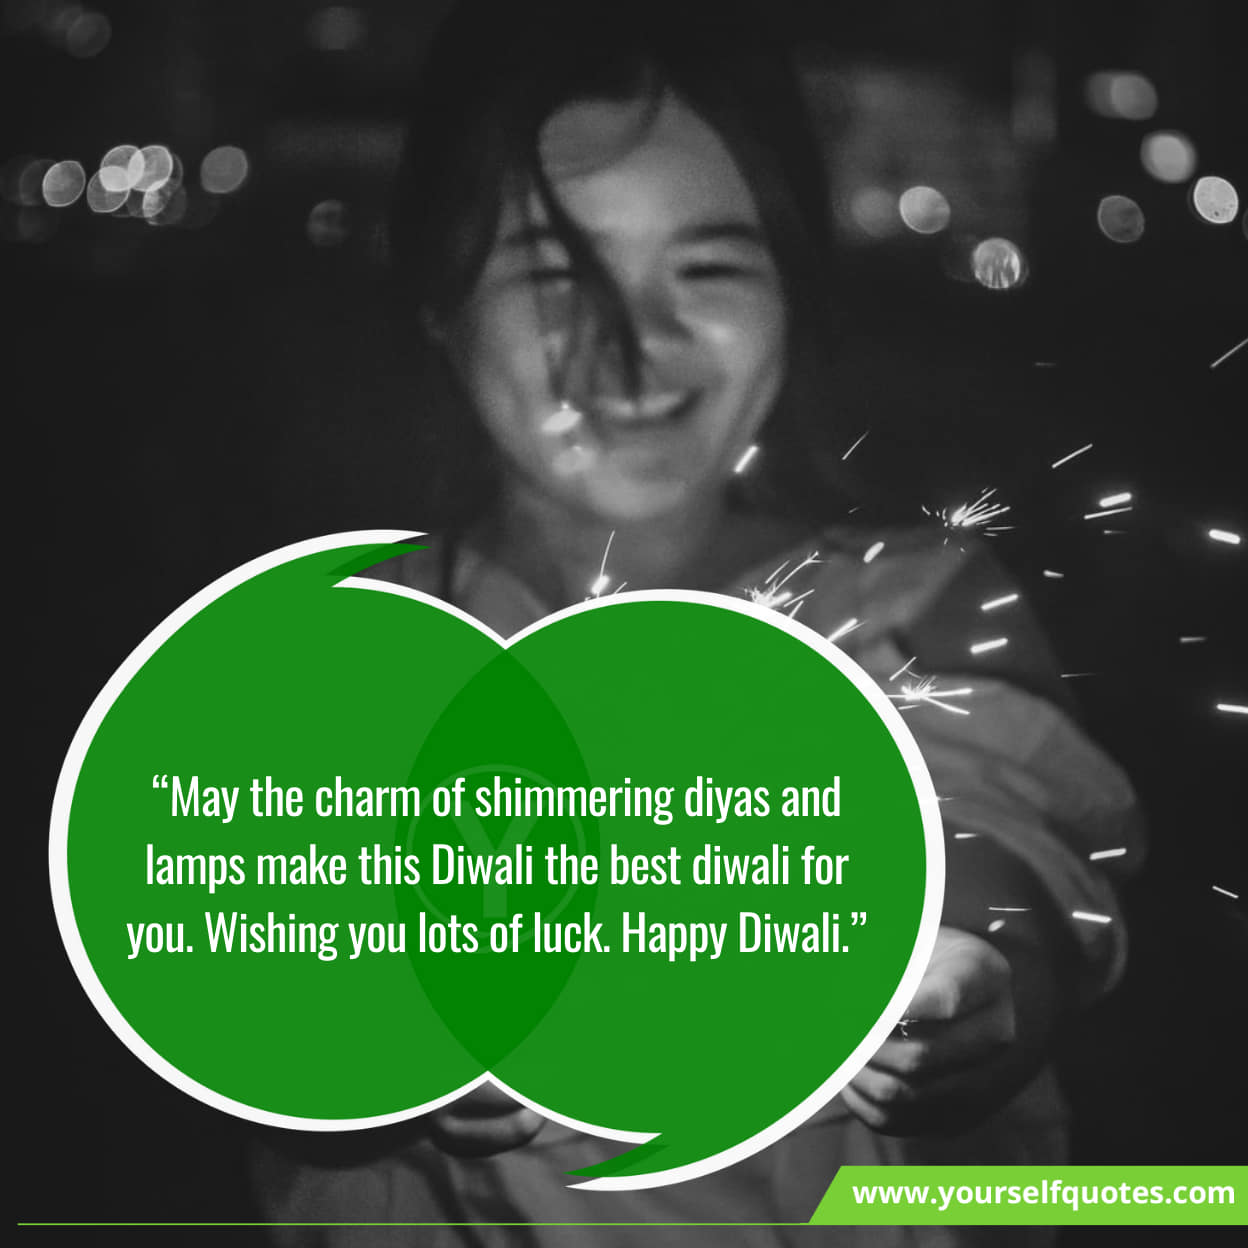 Happy Diwali Messages & Sayings